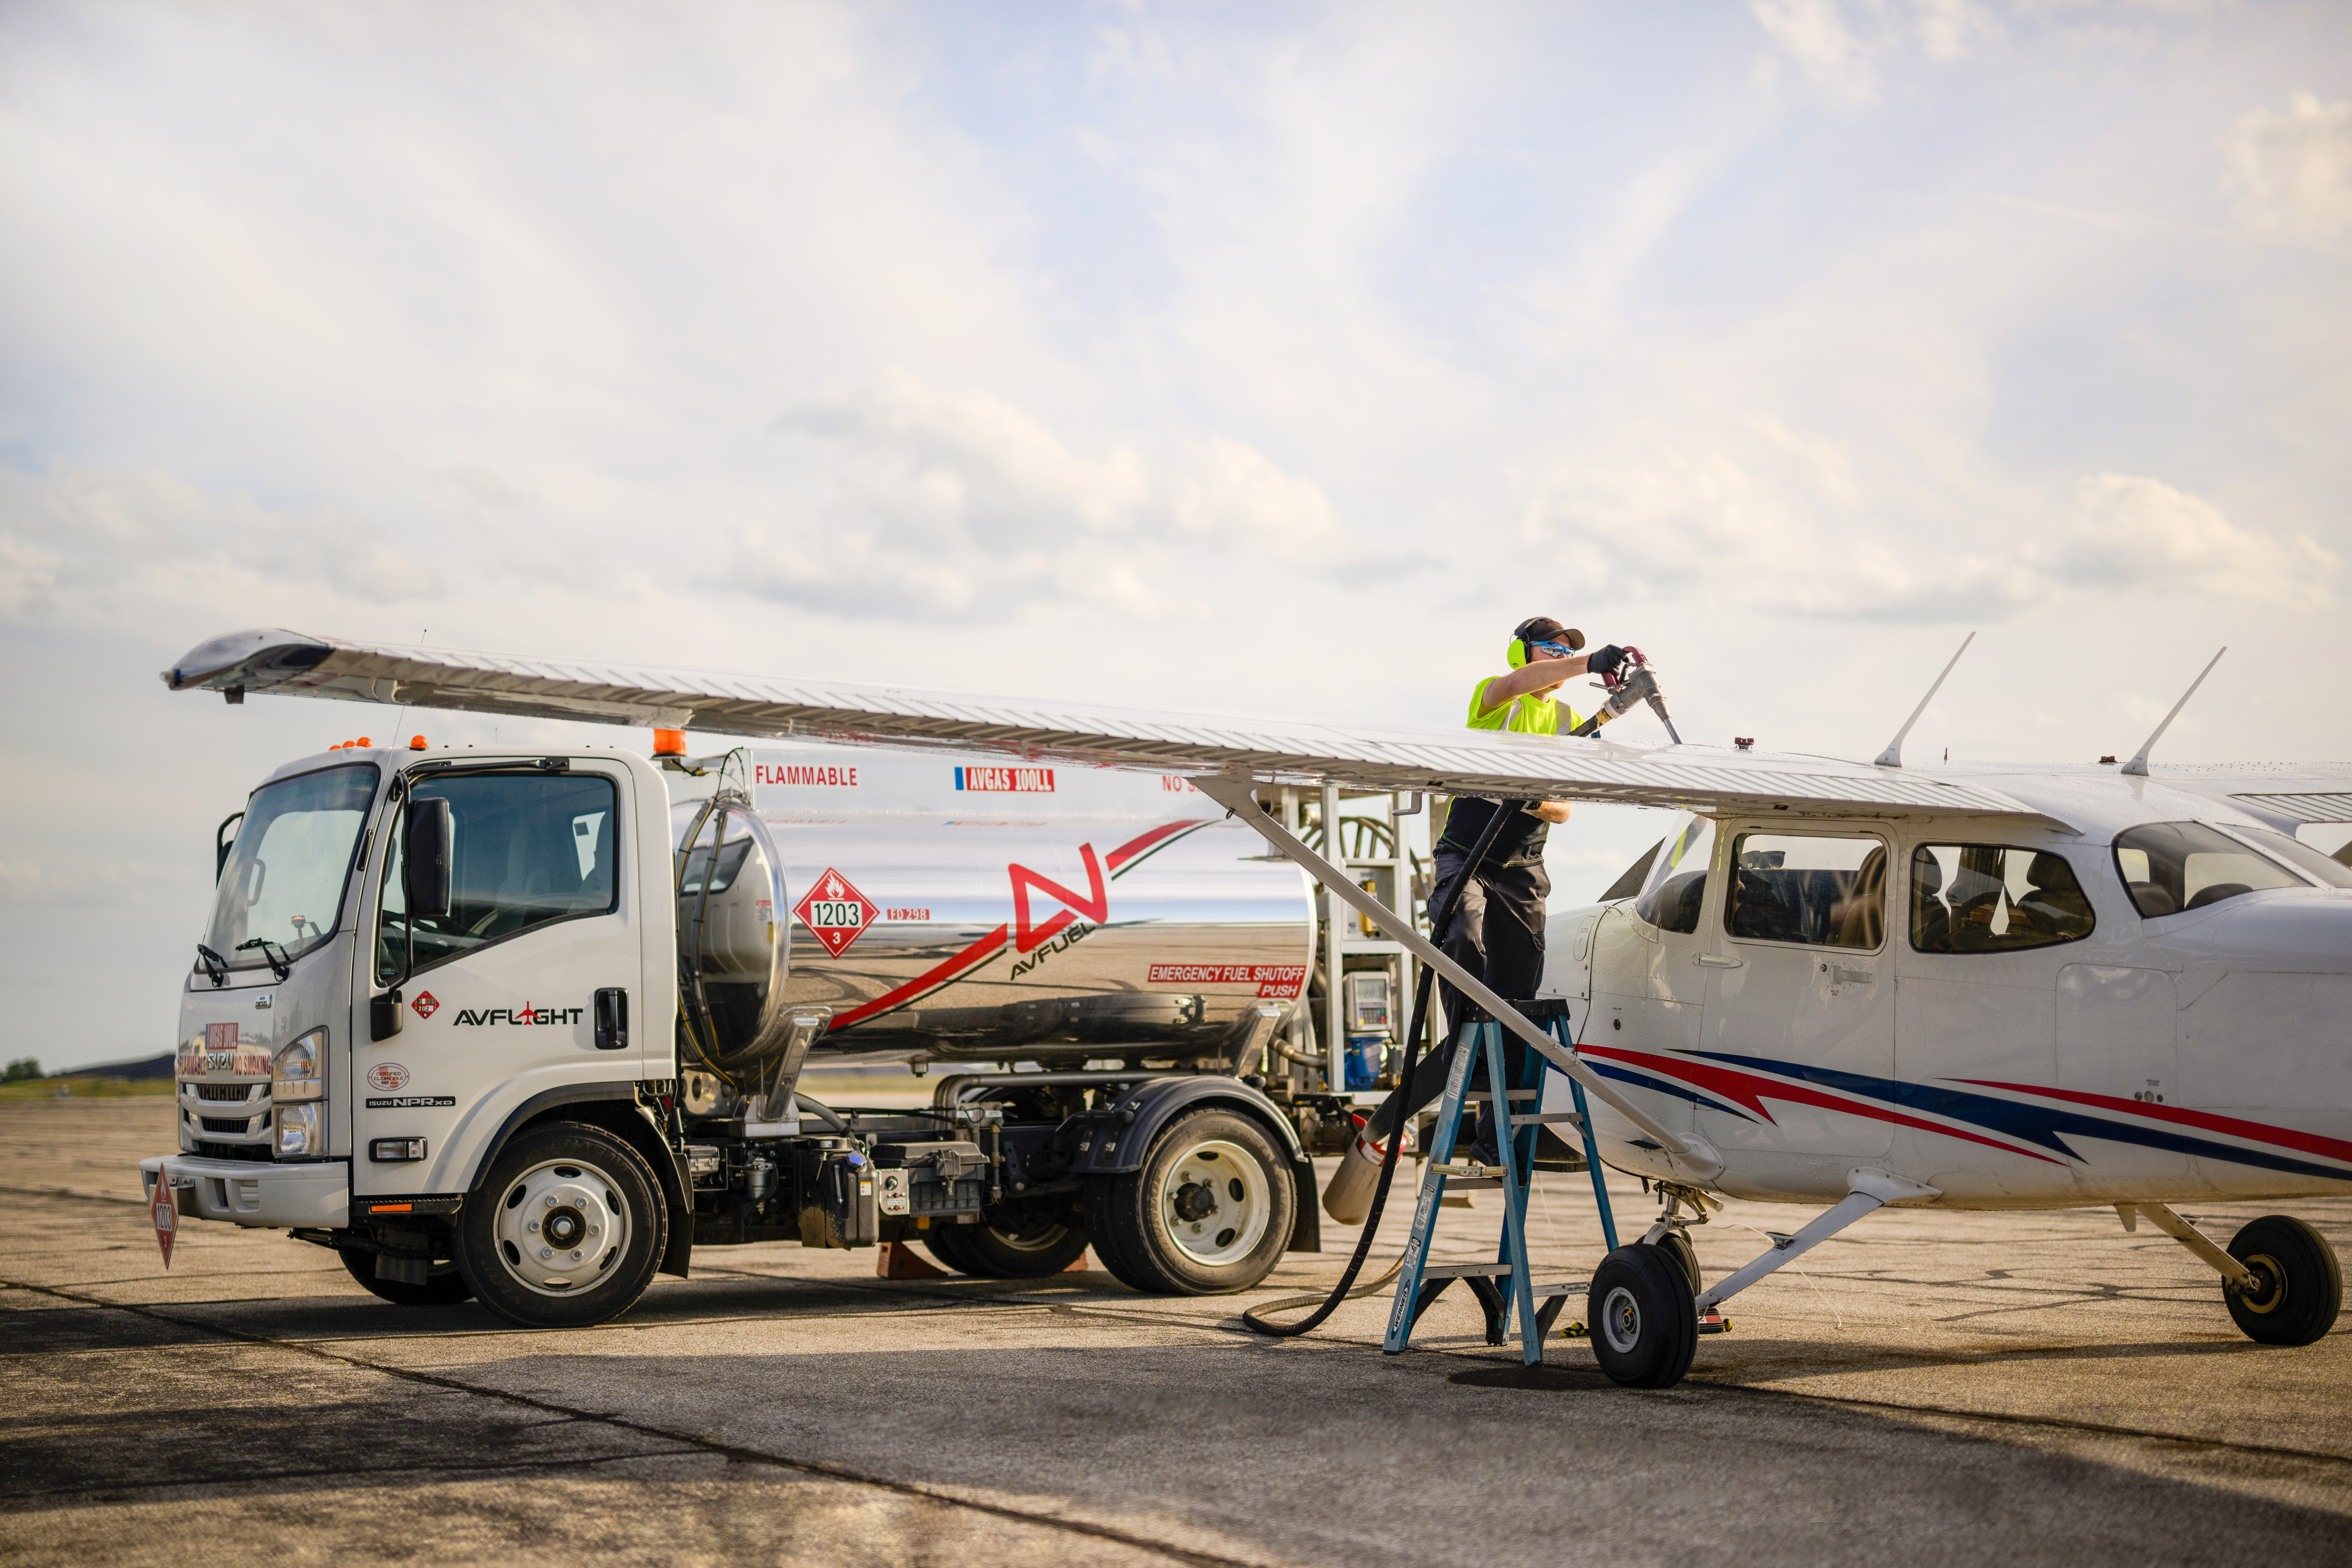 Industry stakeholders celebrate FAA approval of unleaded avgas for GA piston aircraft